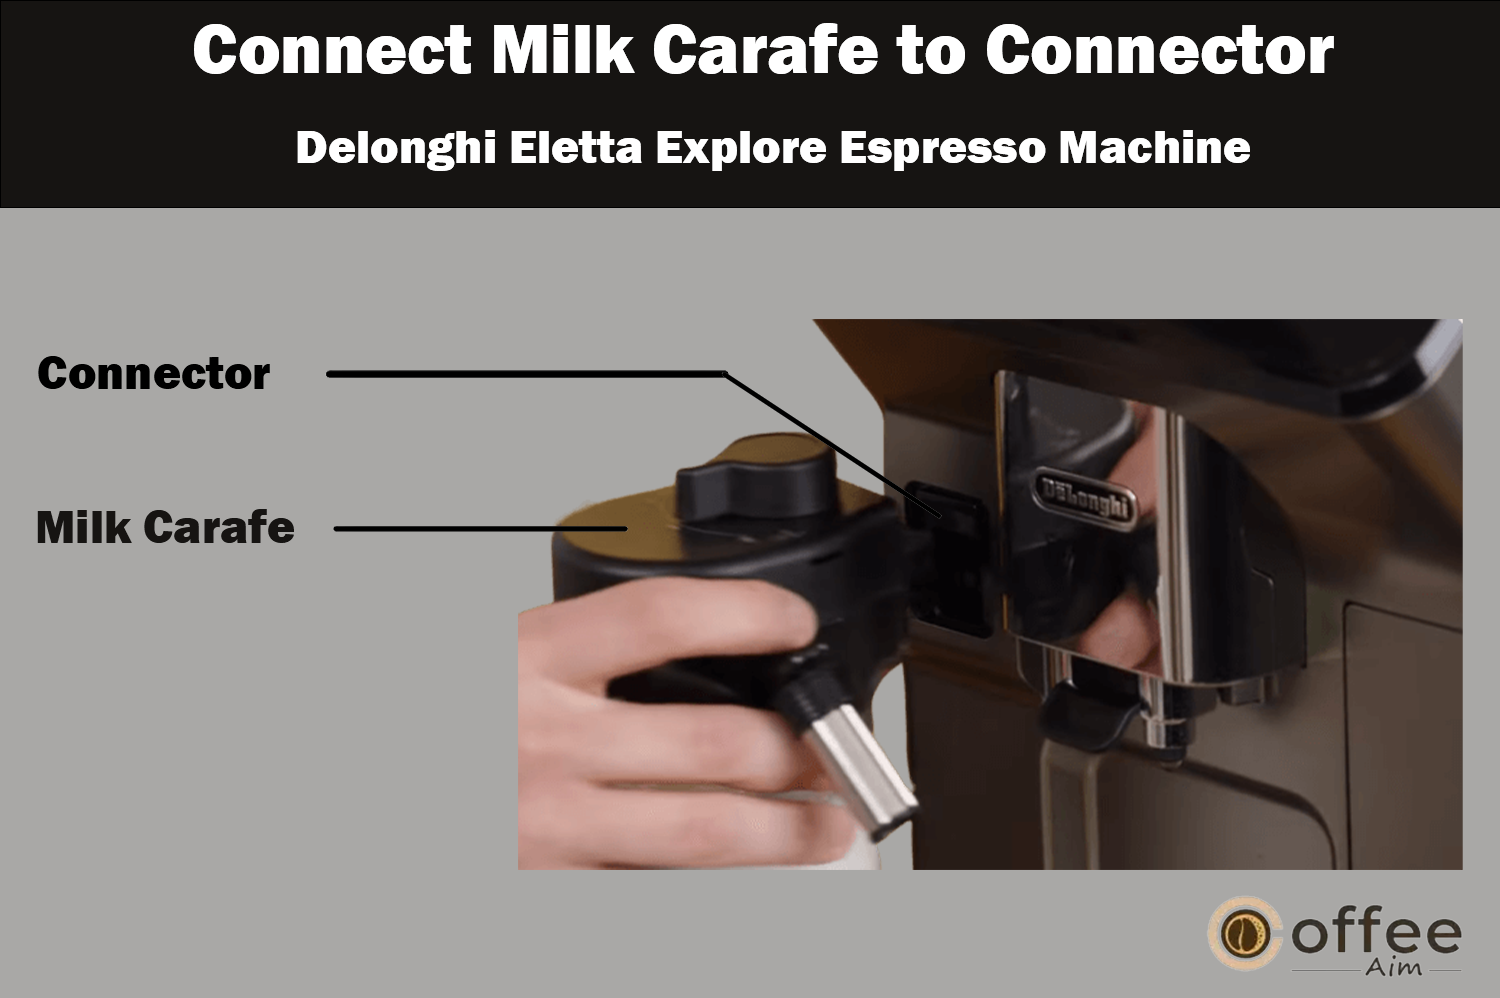 "The image illustrates the process of attaching the milk carafe to the connector of the "Delonghi Eletta Explore Espresso Machine," an essential step discussed in the article "How to Use the Delonghi Eletta Explore Espresso Machine."